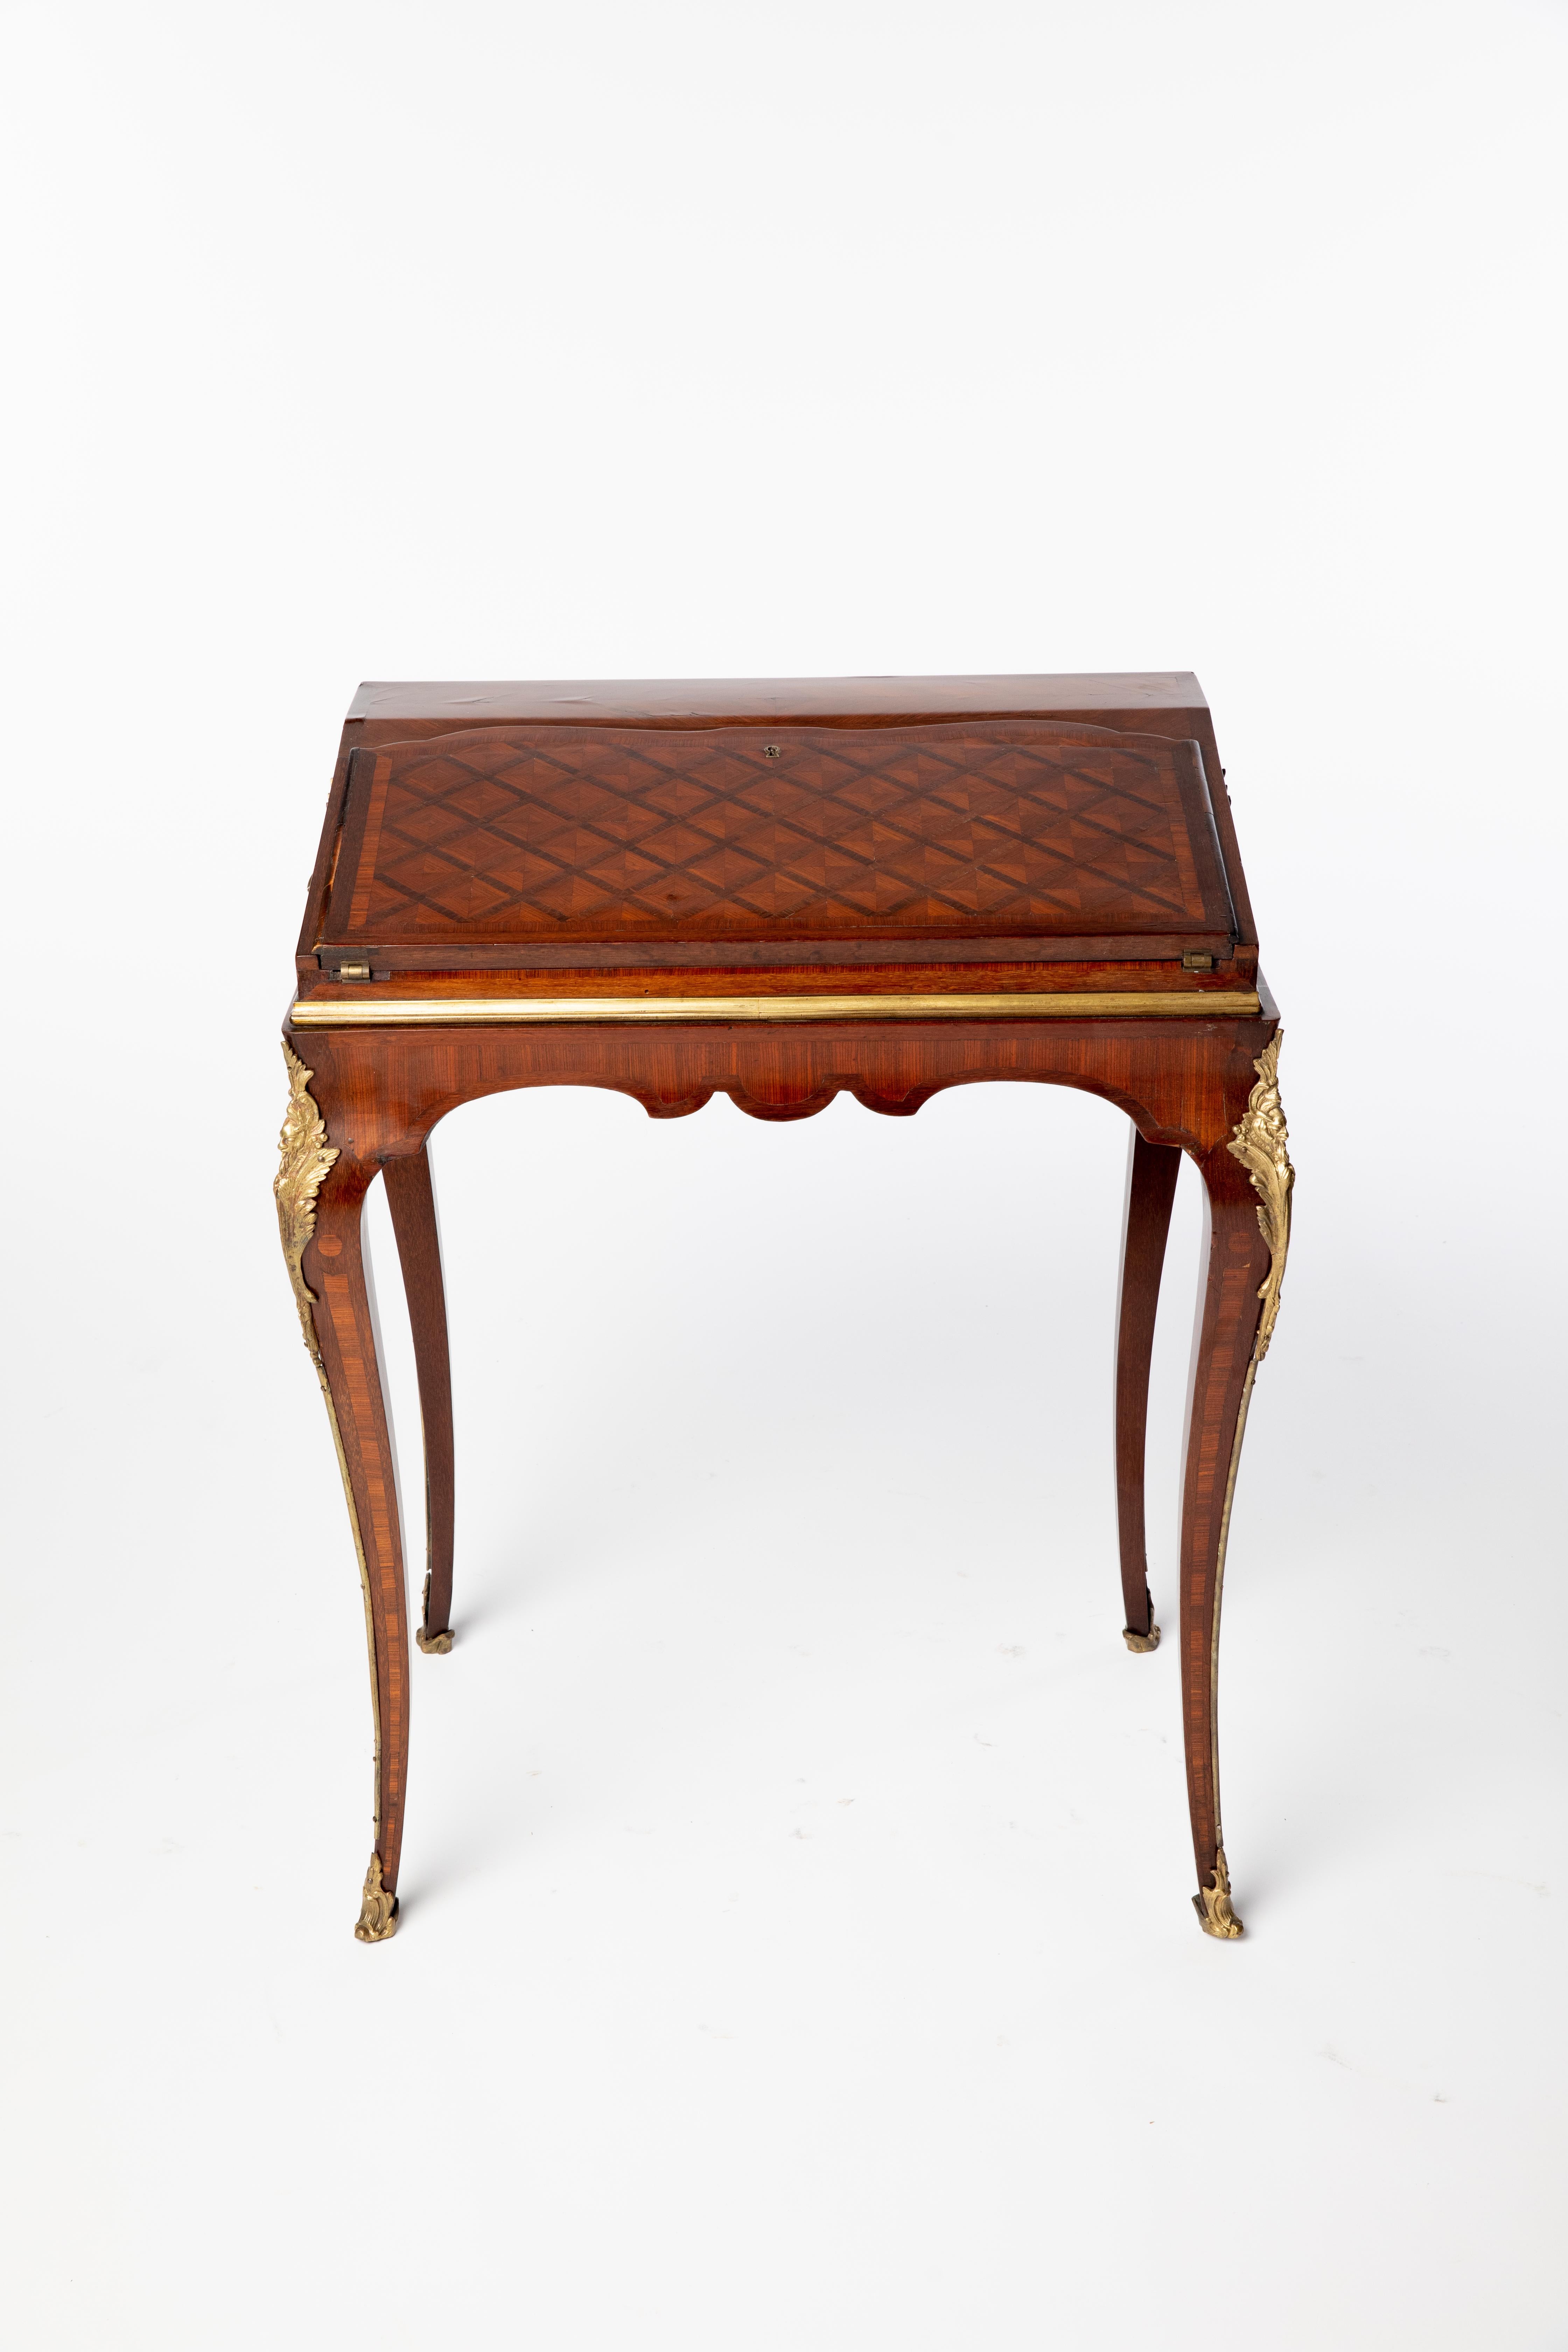 18th Century French Ladies Writing Desk In Excellent Condition For Sale In Houston, TX